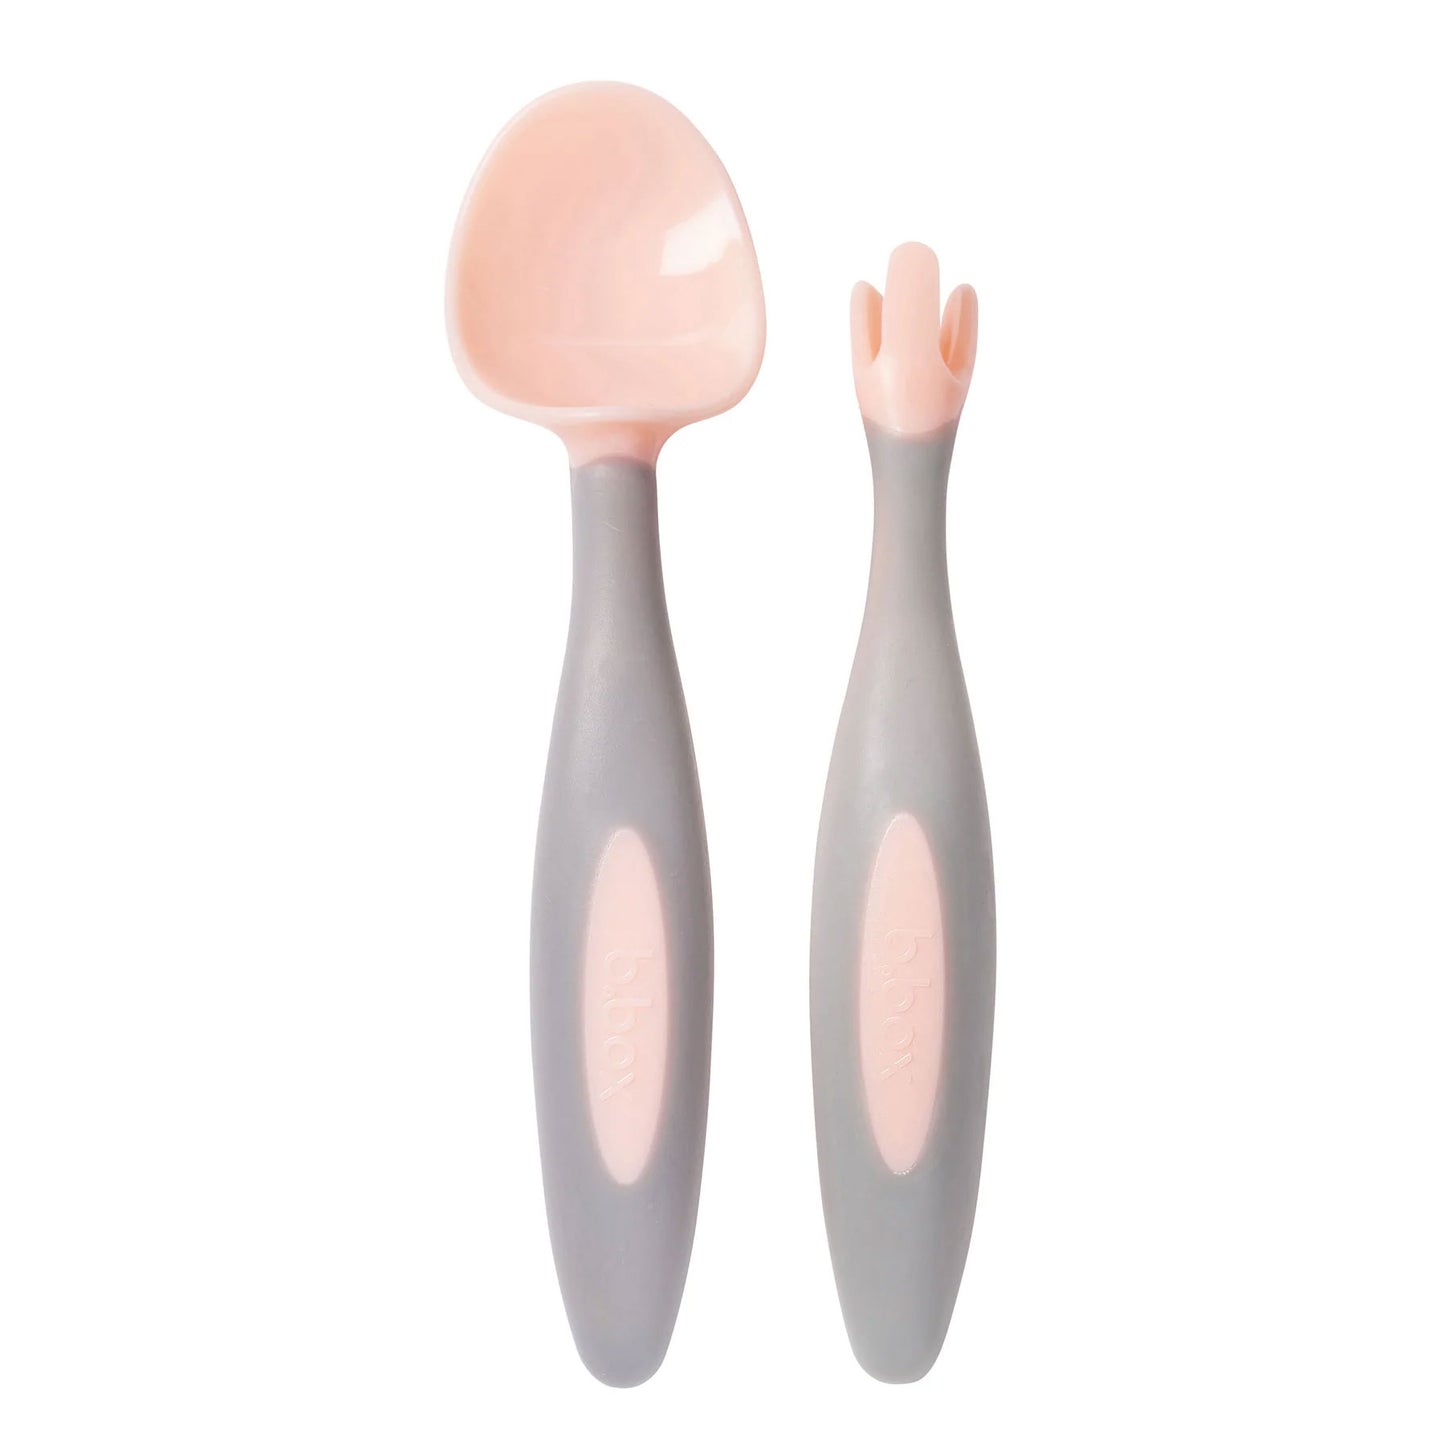 Unique patented fork and spoon, designed to fit the size and shape of little mouths. Angled handle to encourage independence.